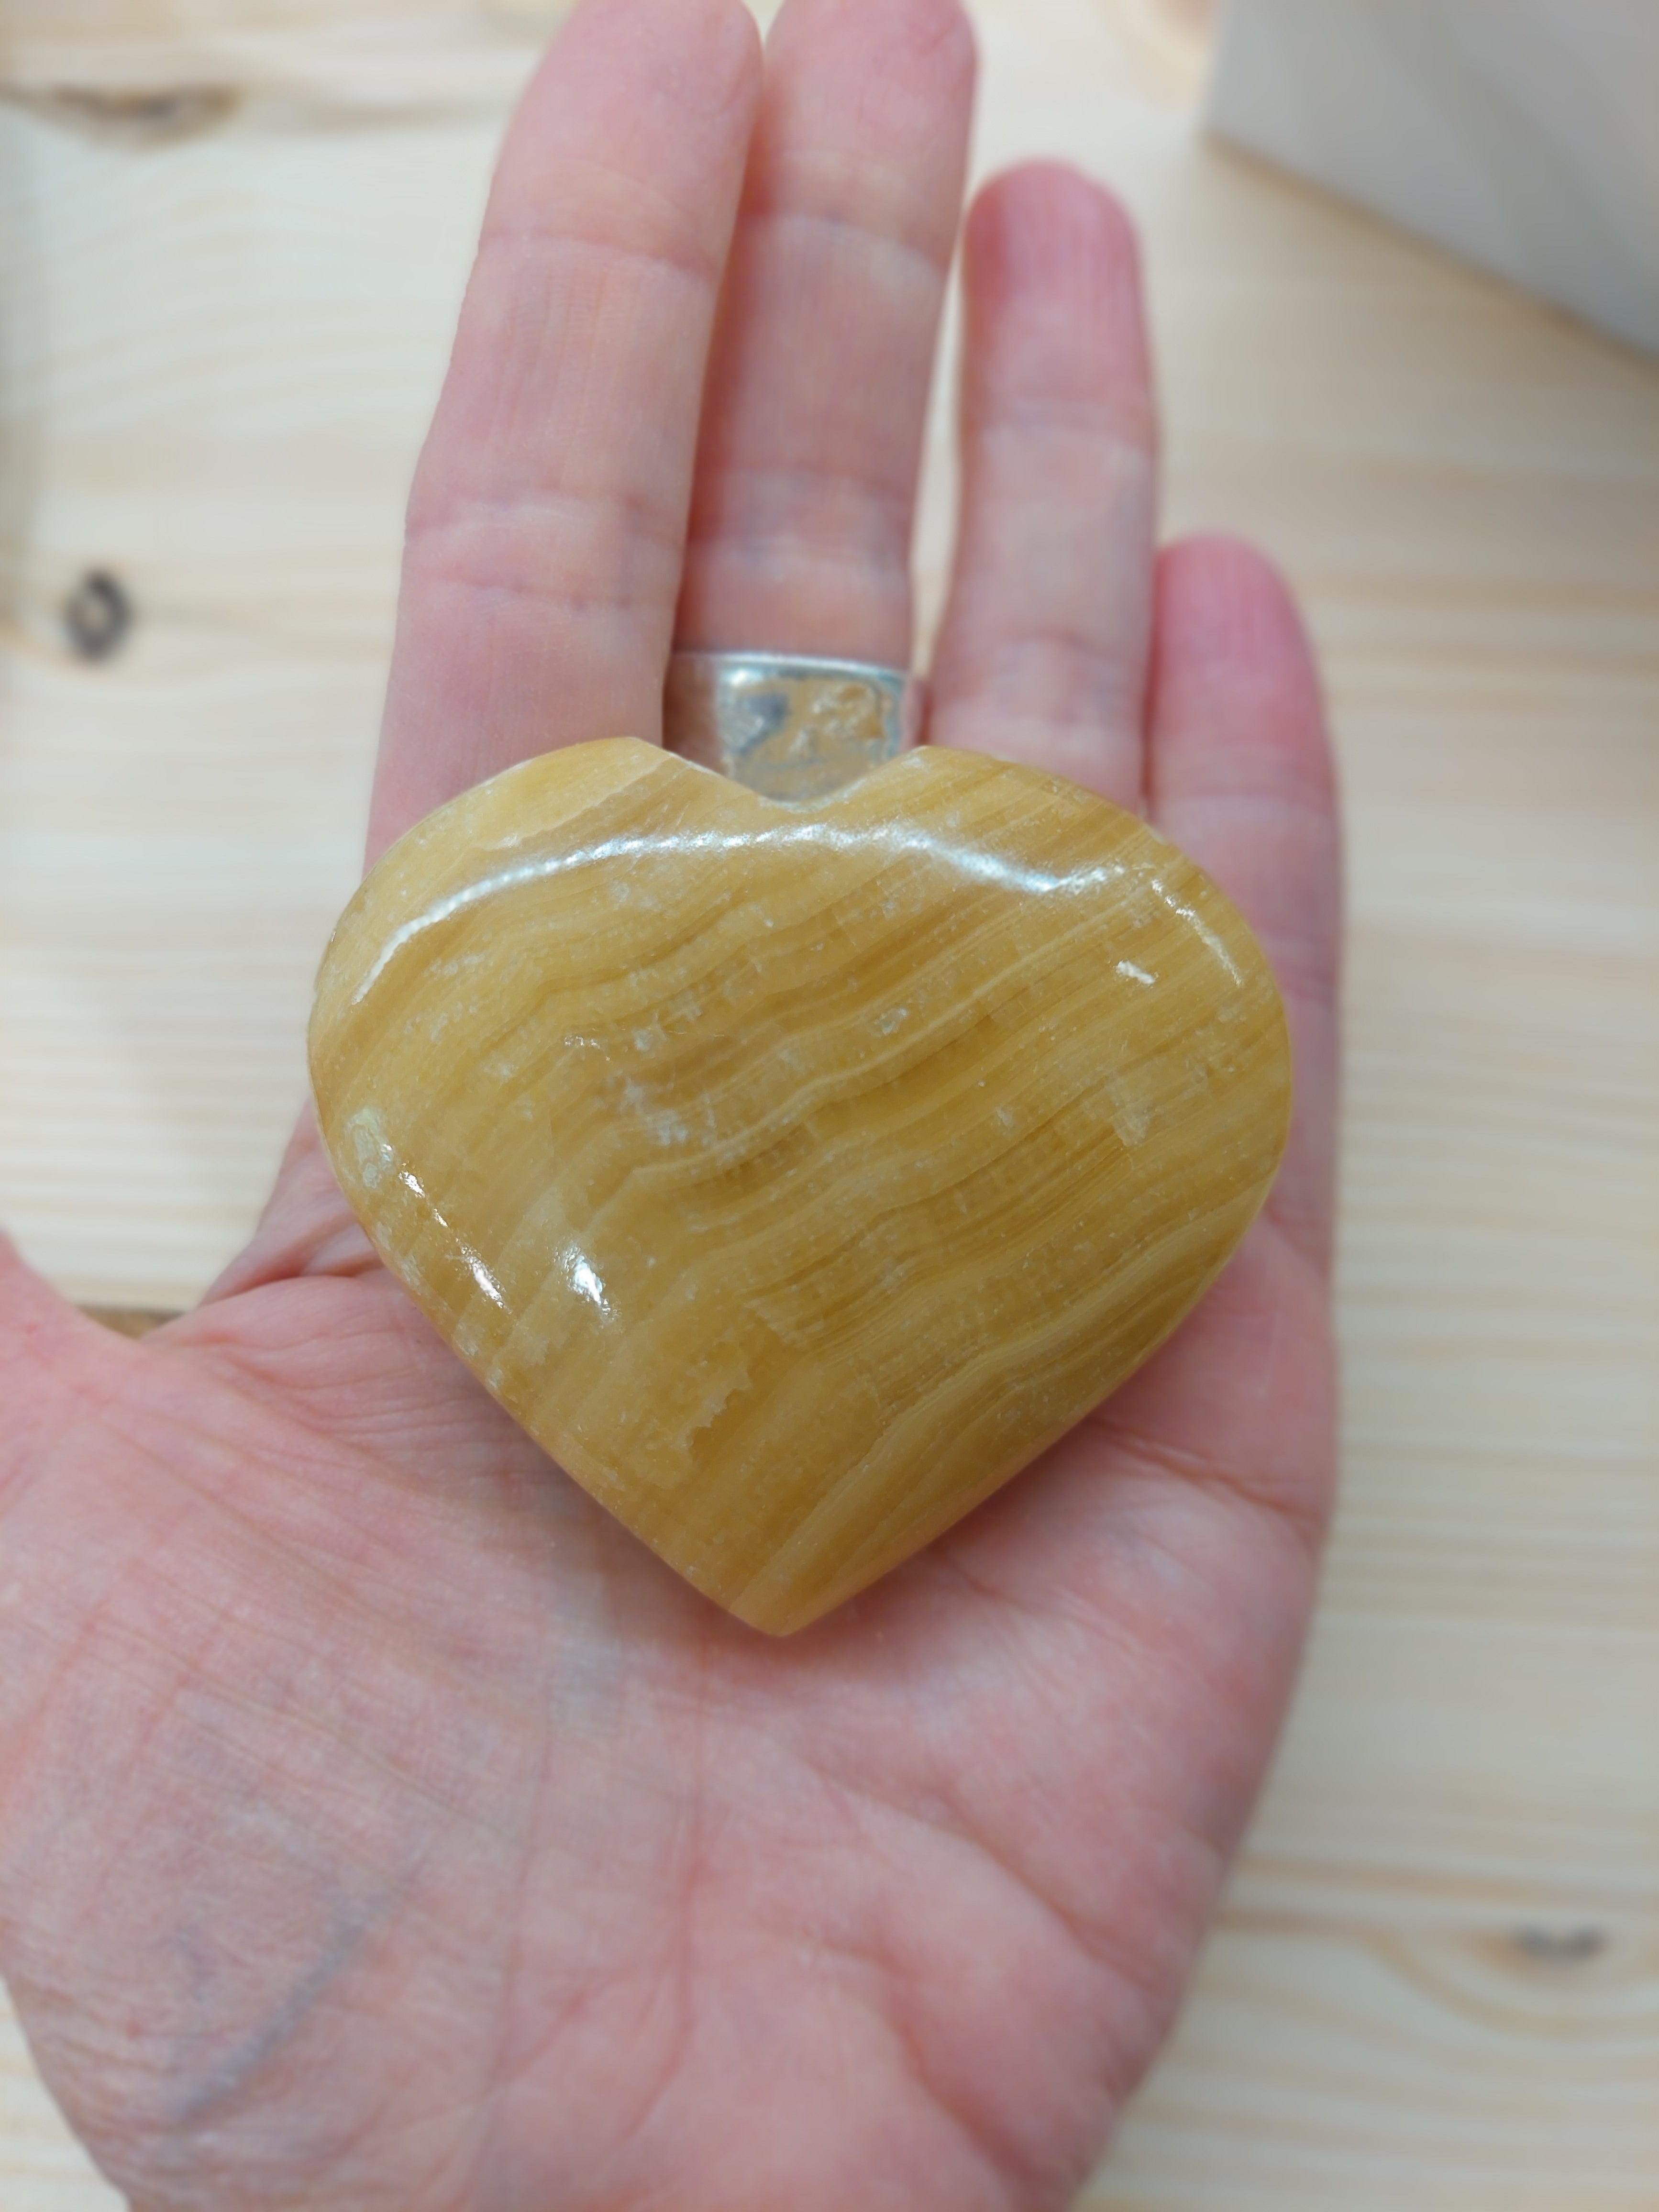 Toffee Calcite Heart - 6cm (width)